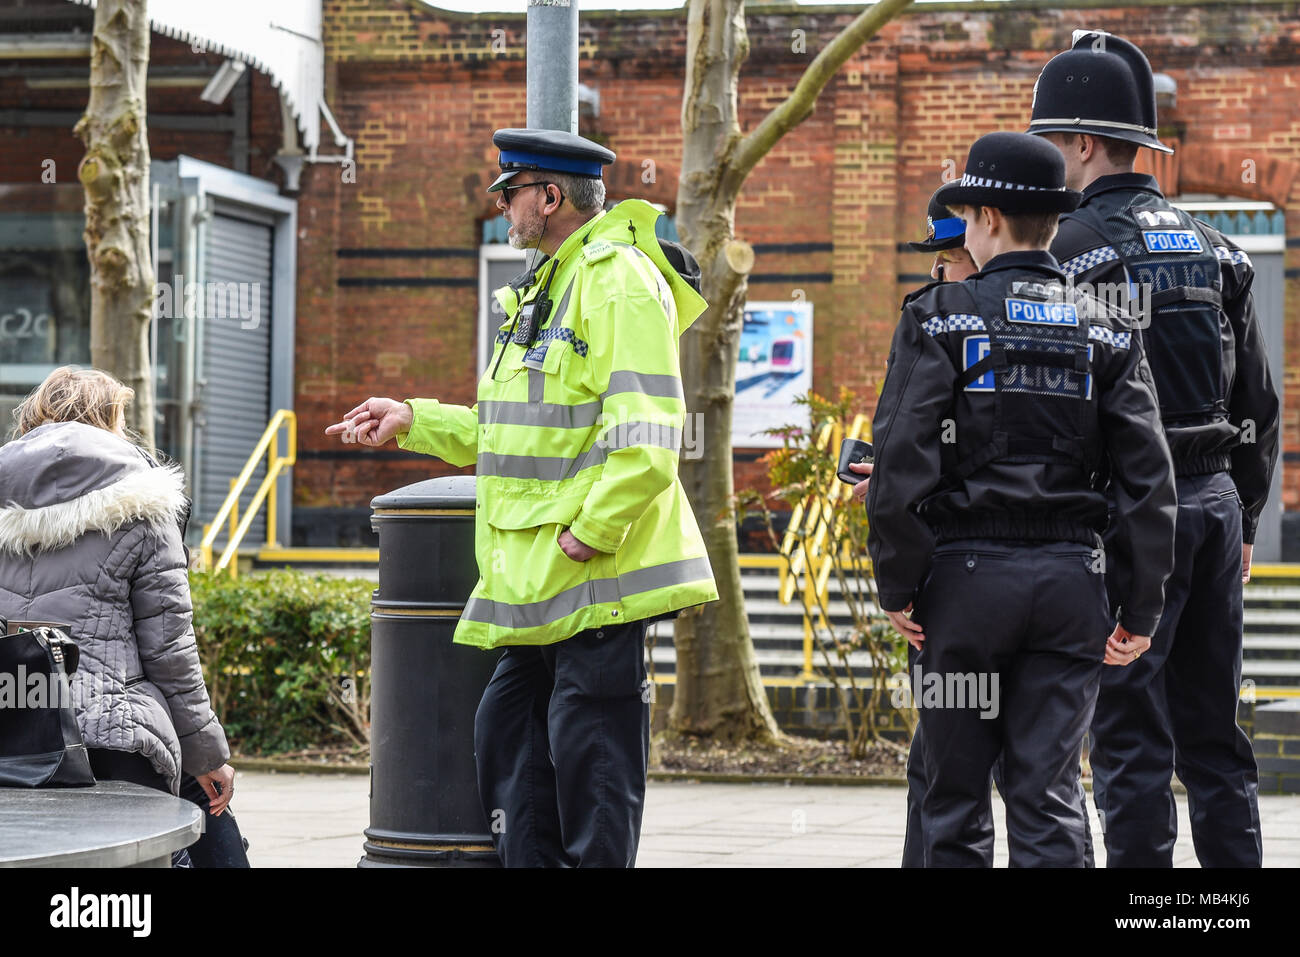 A dispersal order has been put in place in Southend on Sea town centre to tackle anti-social behaviour in response to an increase in disorder within the town centre linked to groups of young people. Essex Police have been patrolling in numbers around the town's University and campus, moving people on Stock Photo